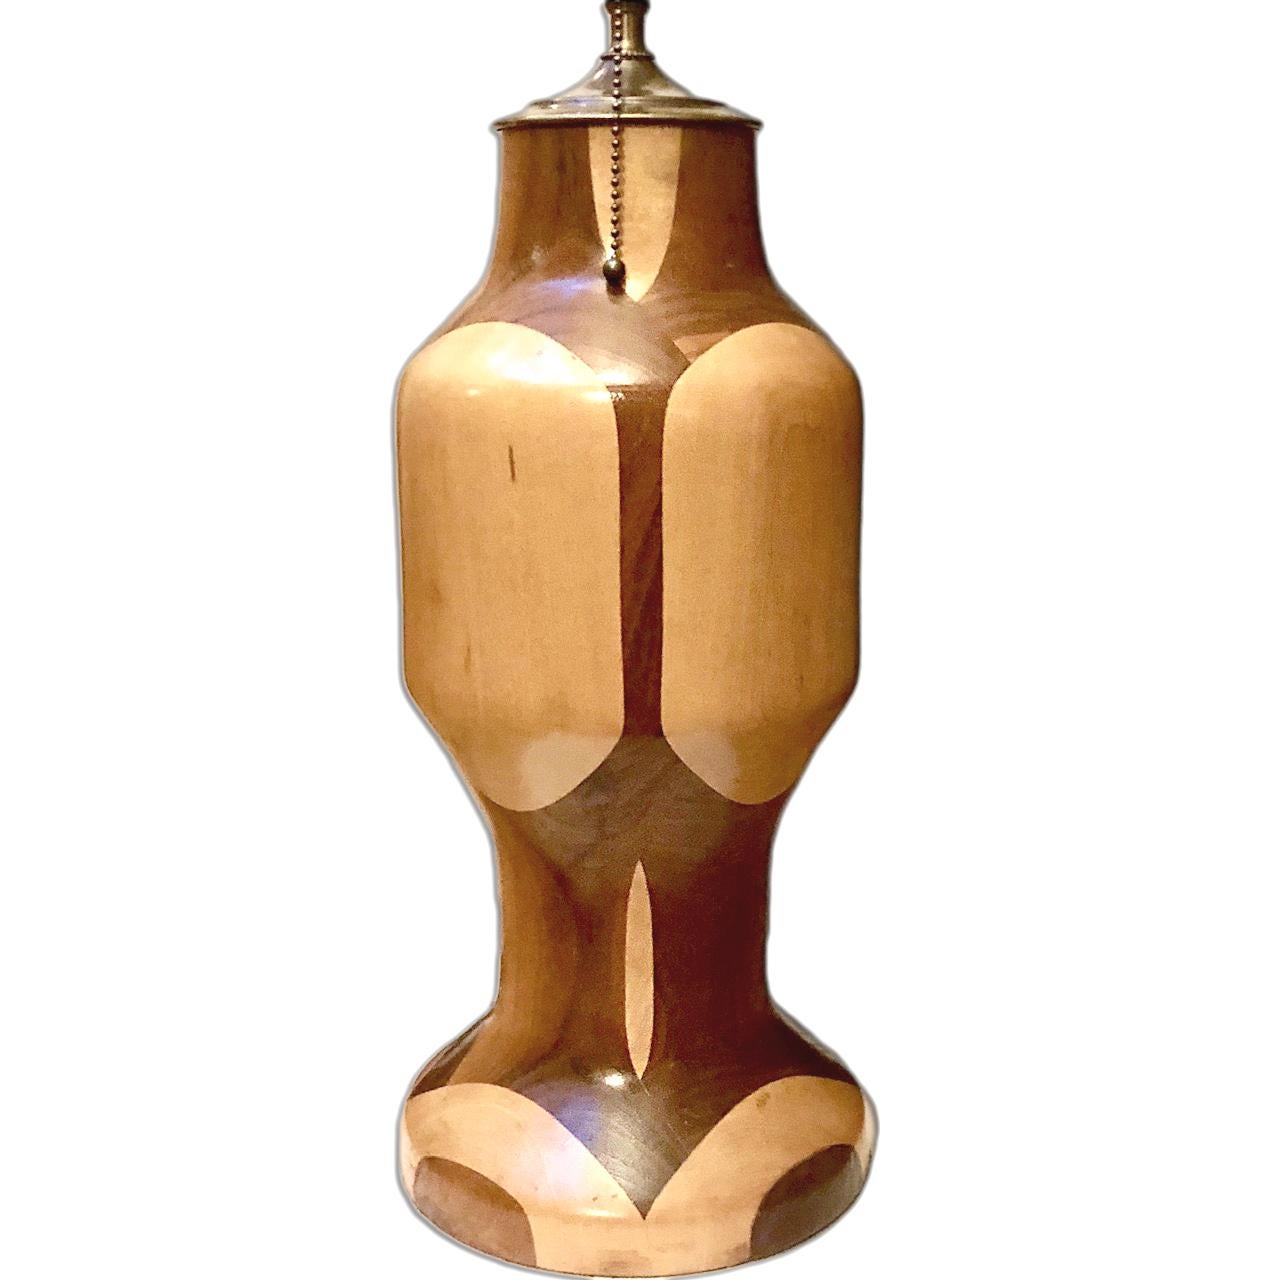 A single circa 1950's Italian two-toned turned wood table lamp.

Measurements:
Height of body: 17